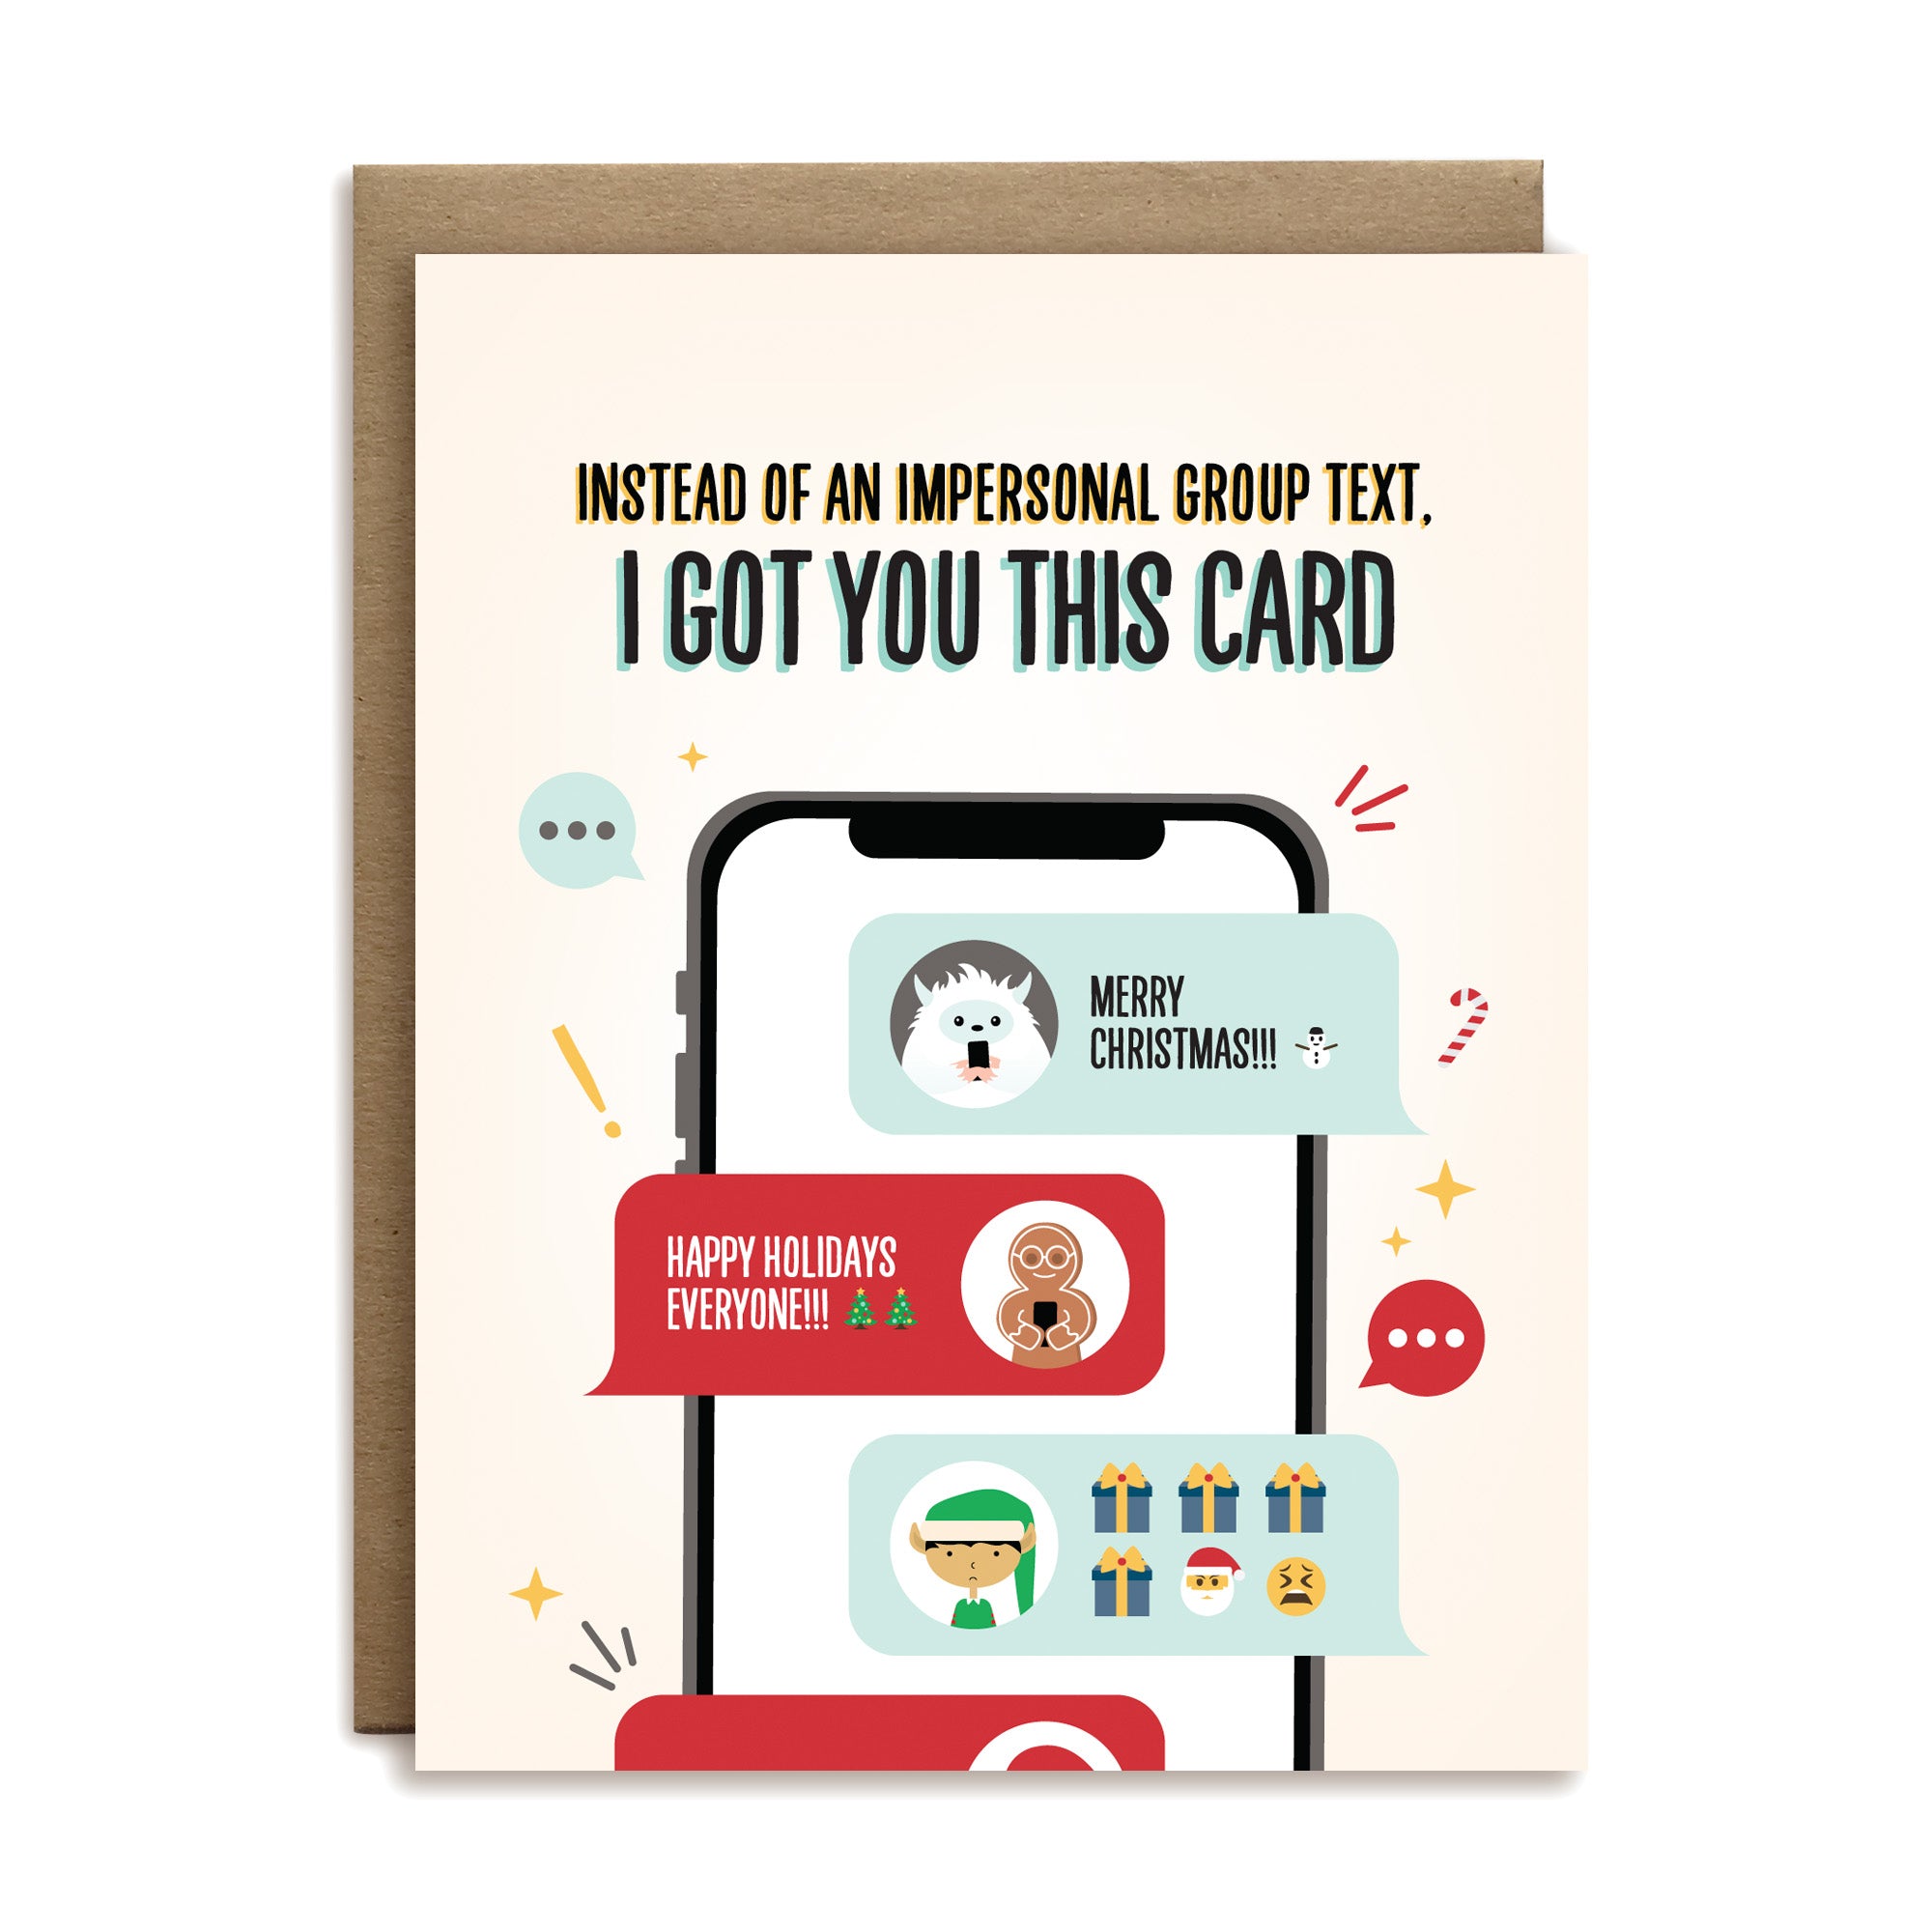 Instead of an impersonal group text, I got you this card holiday greeting card by I’ll Know It When I See It